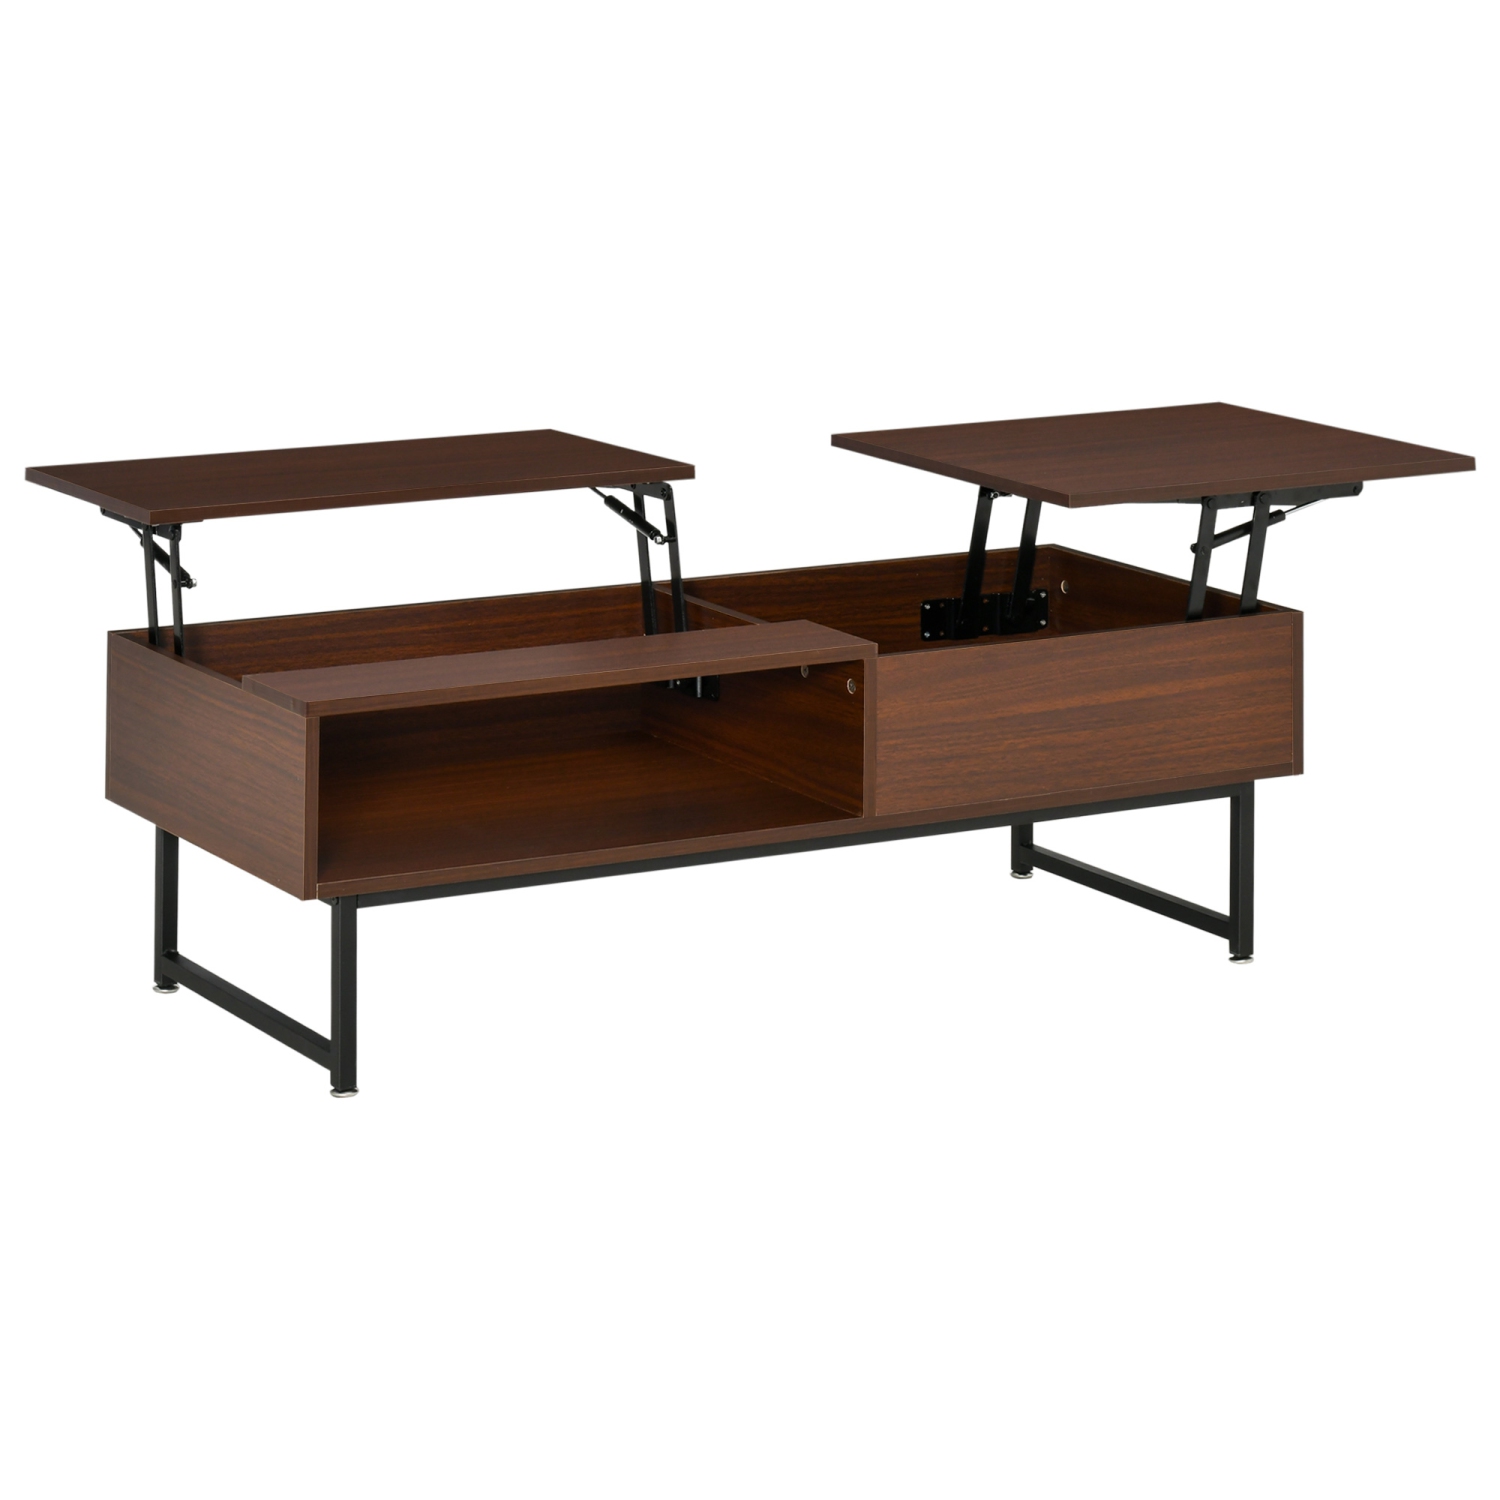 HOMCOM Modern Lift Top Coffee Table with Hidden Storage Compartment and Metal Frame, Center Table for Living Room, Brown